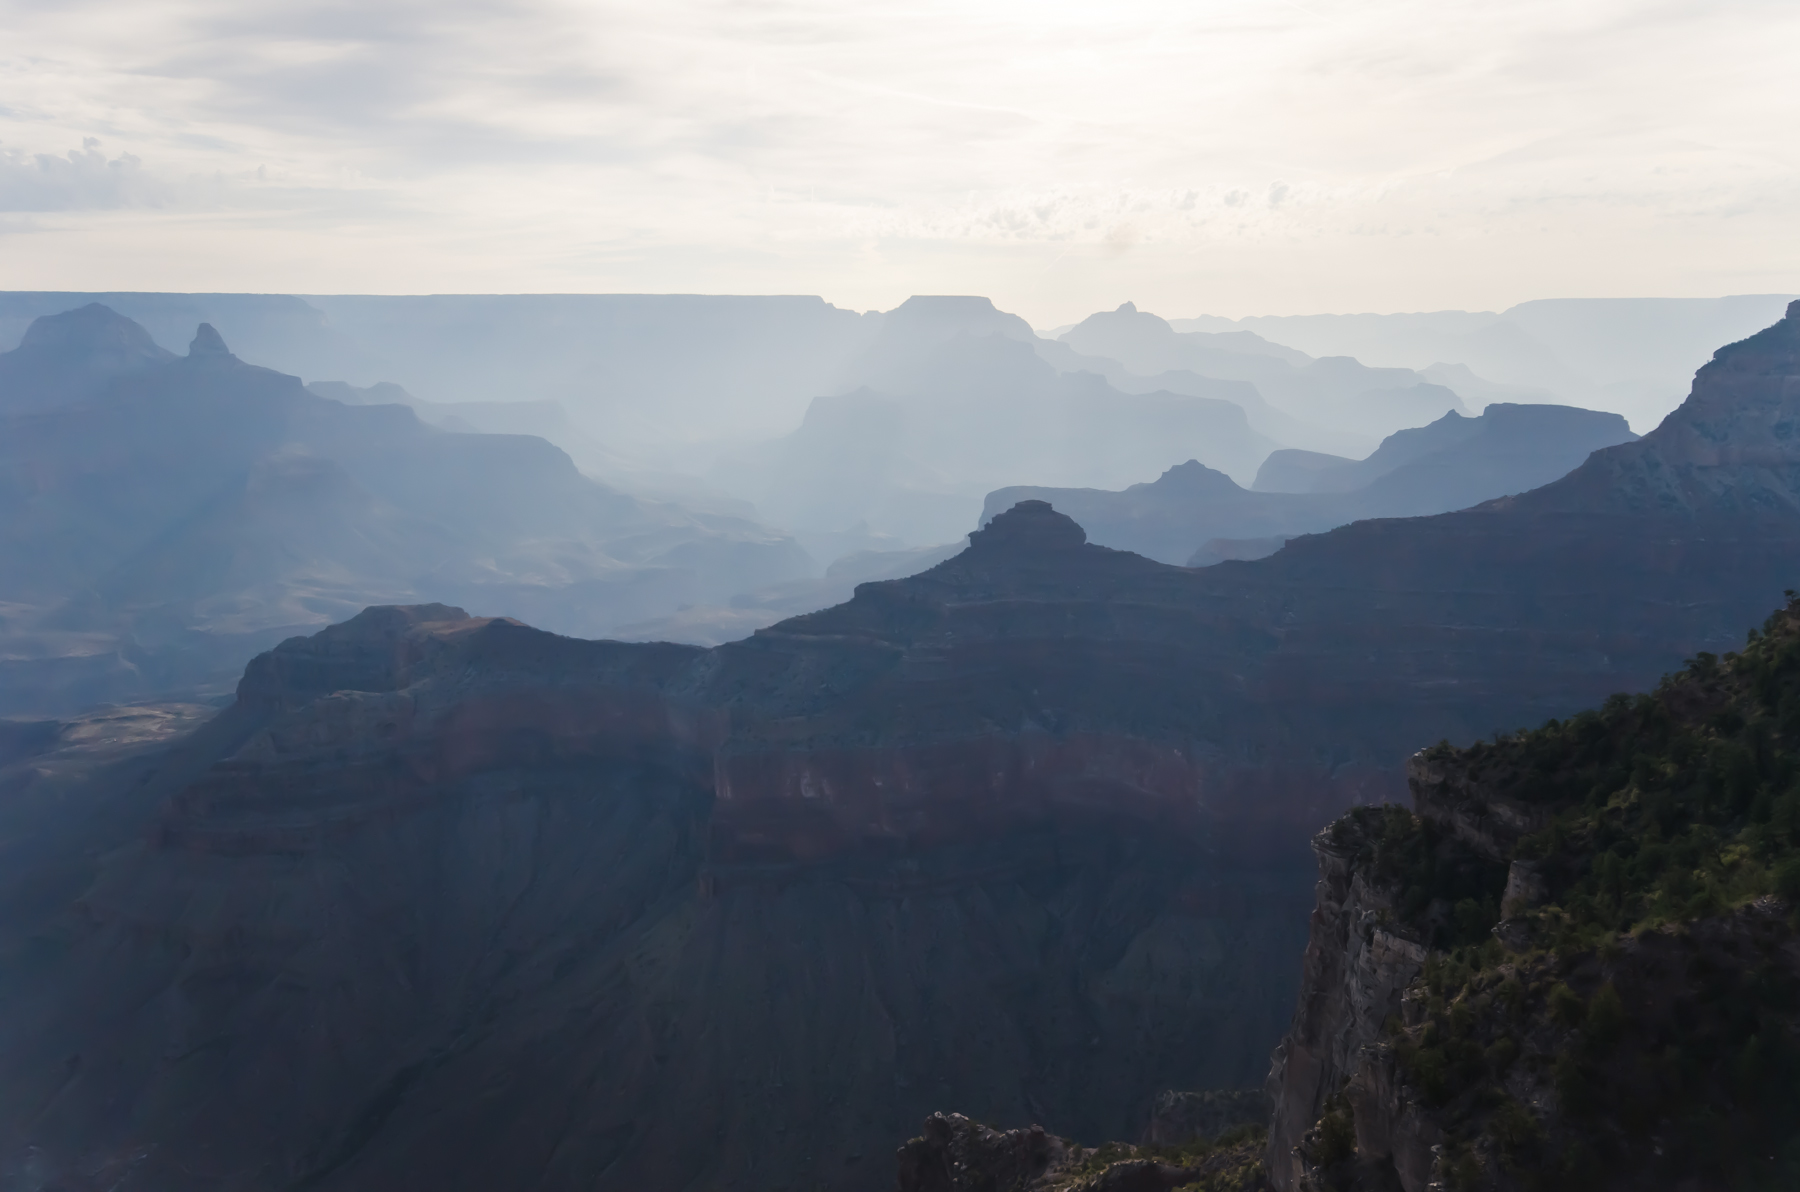 The magical Grand Canyon just after sunrise.